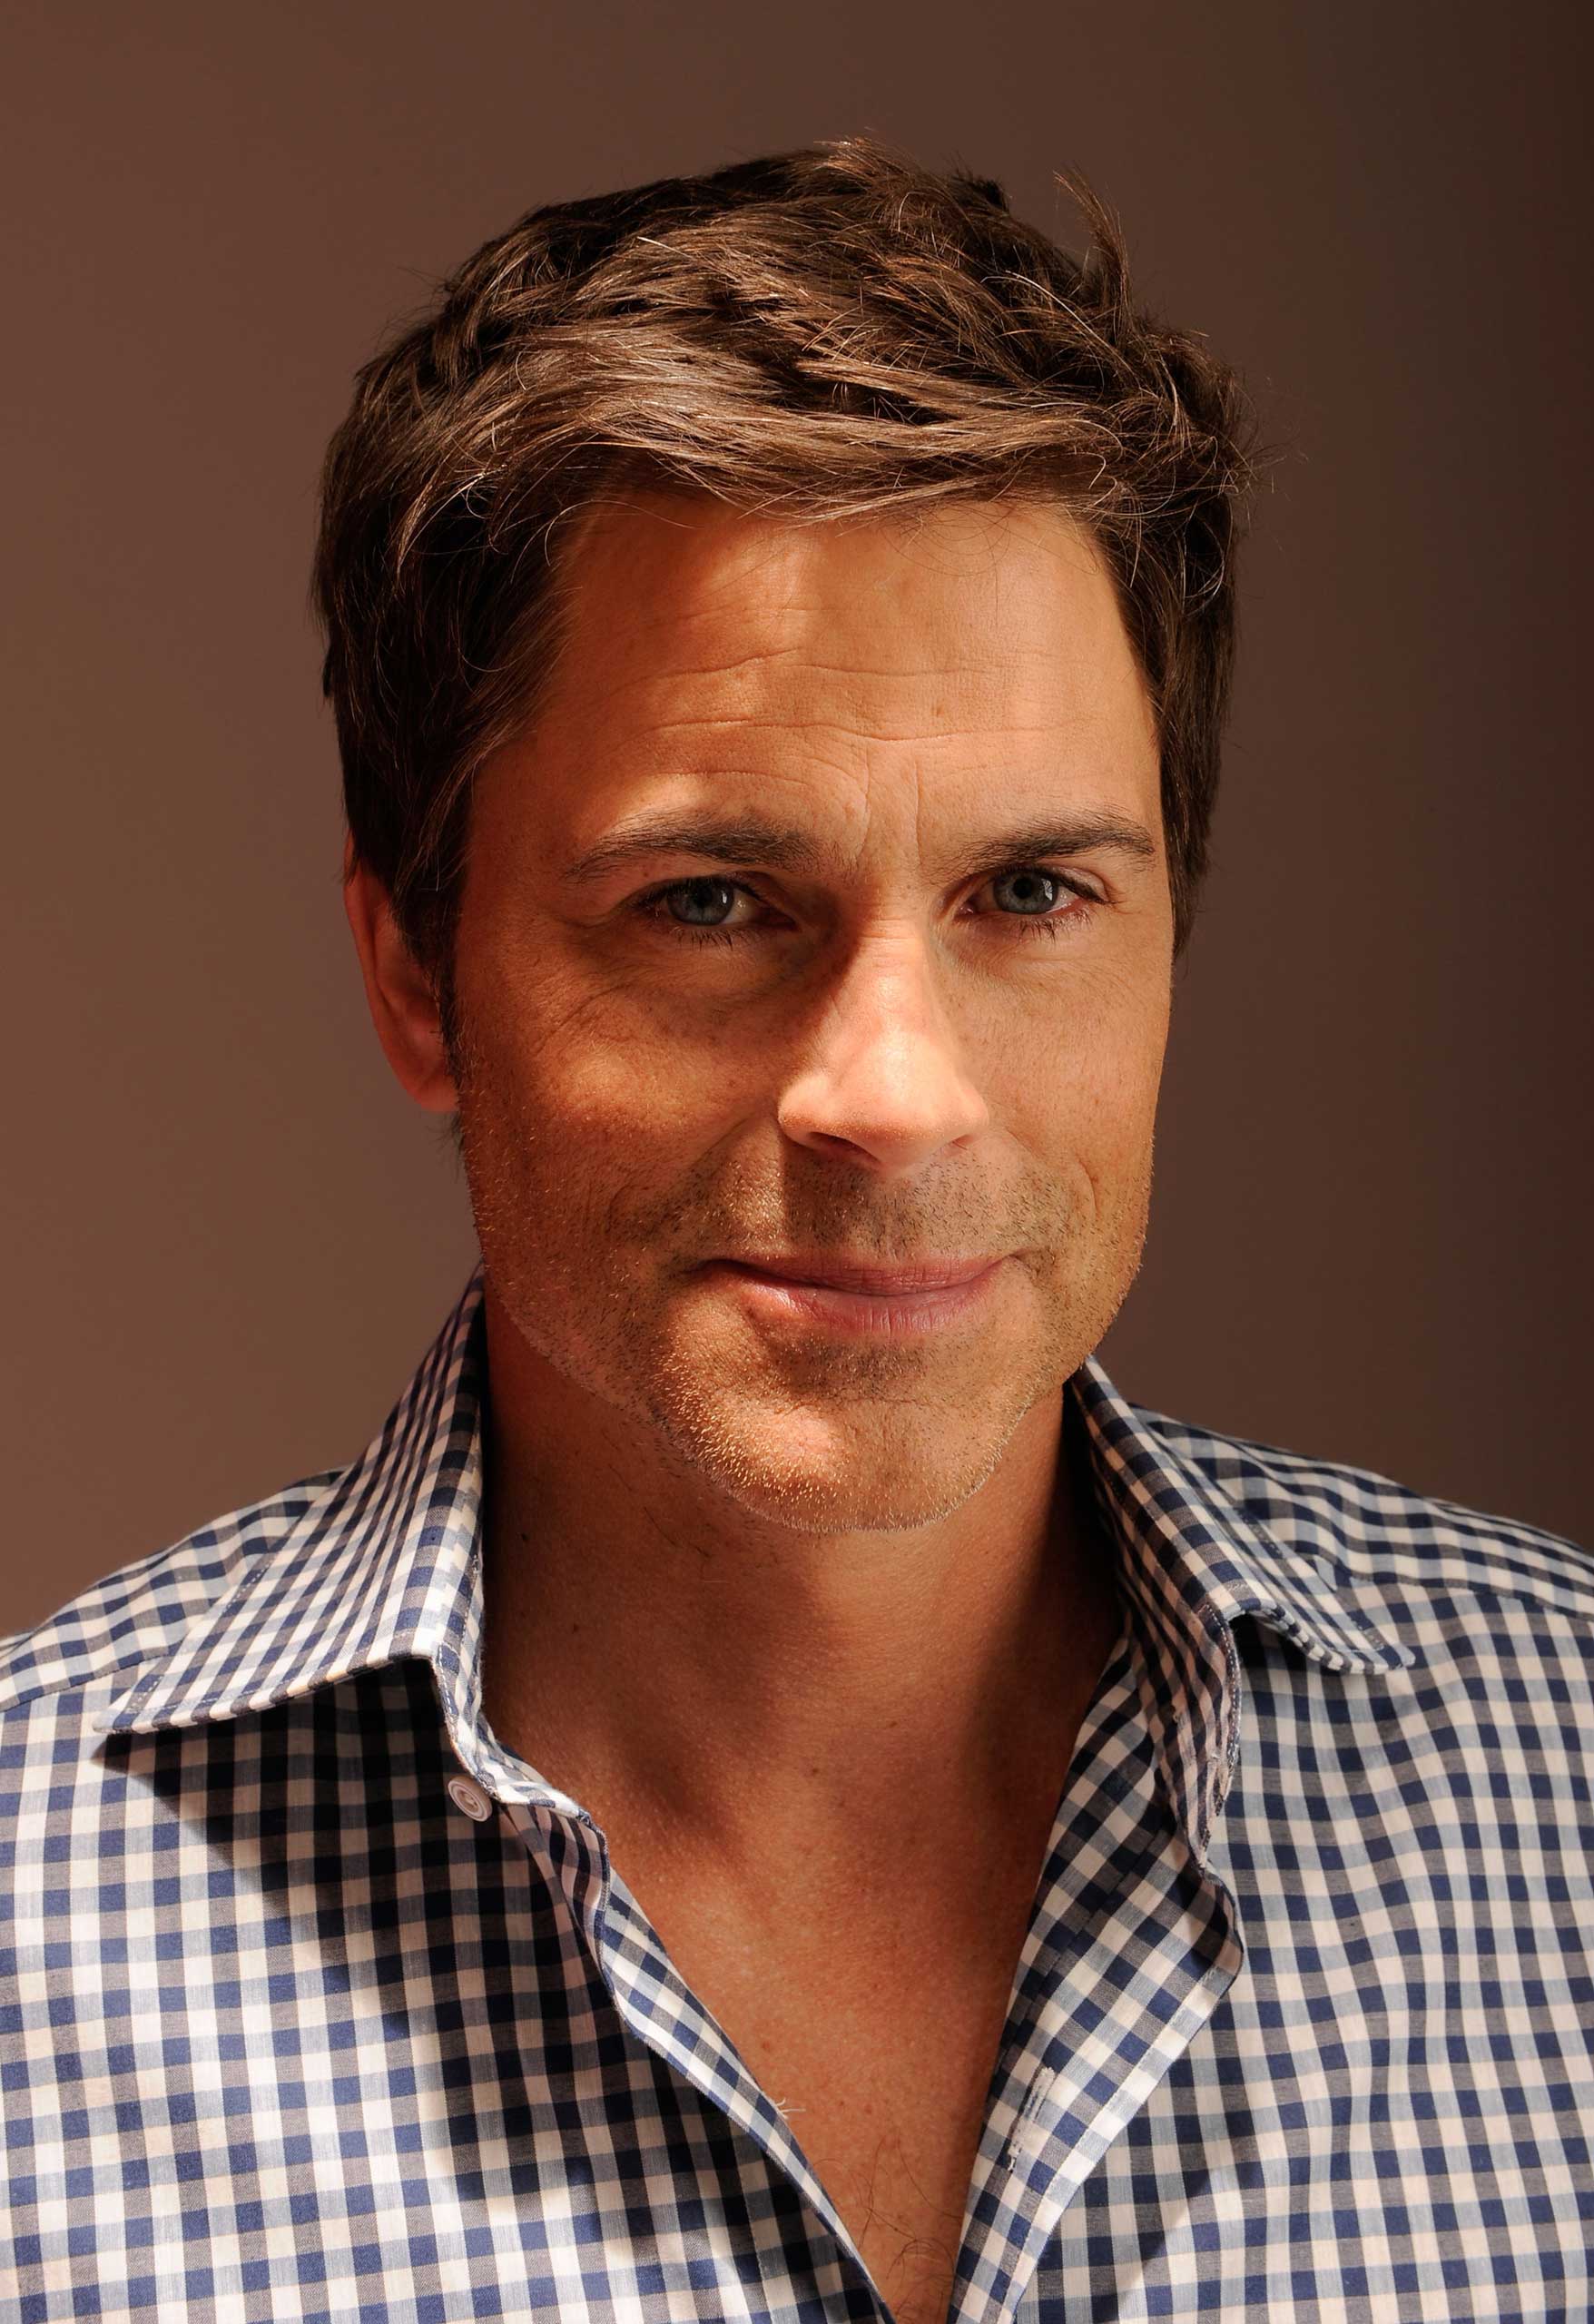 Actor Rob Lowe visits the Tribeca Film Festival 2012 portrait studio on April 25, 2012 in New York City.